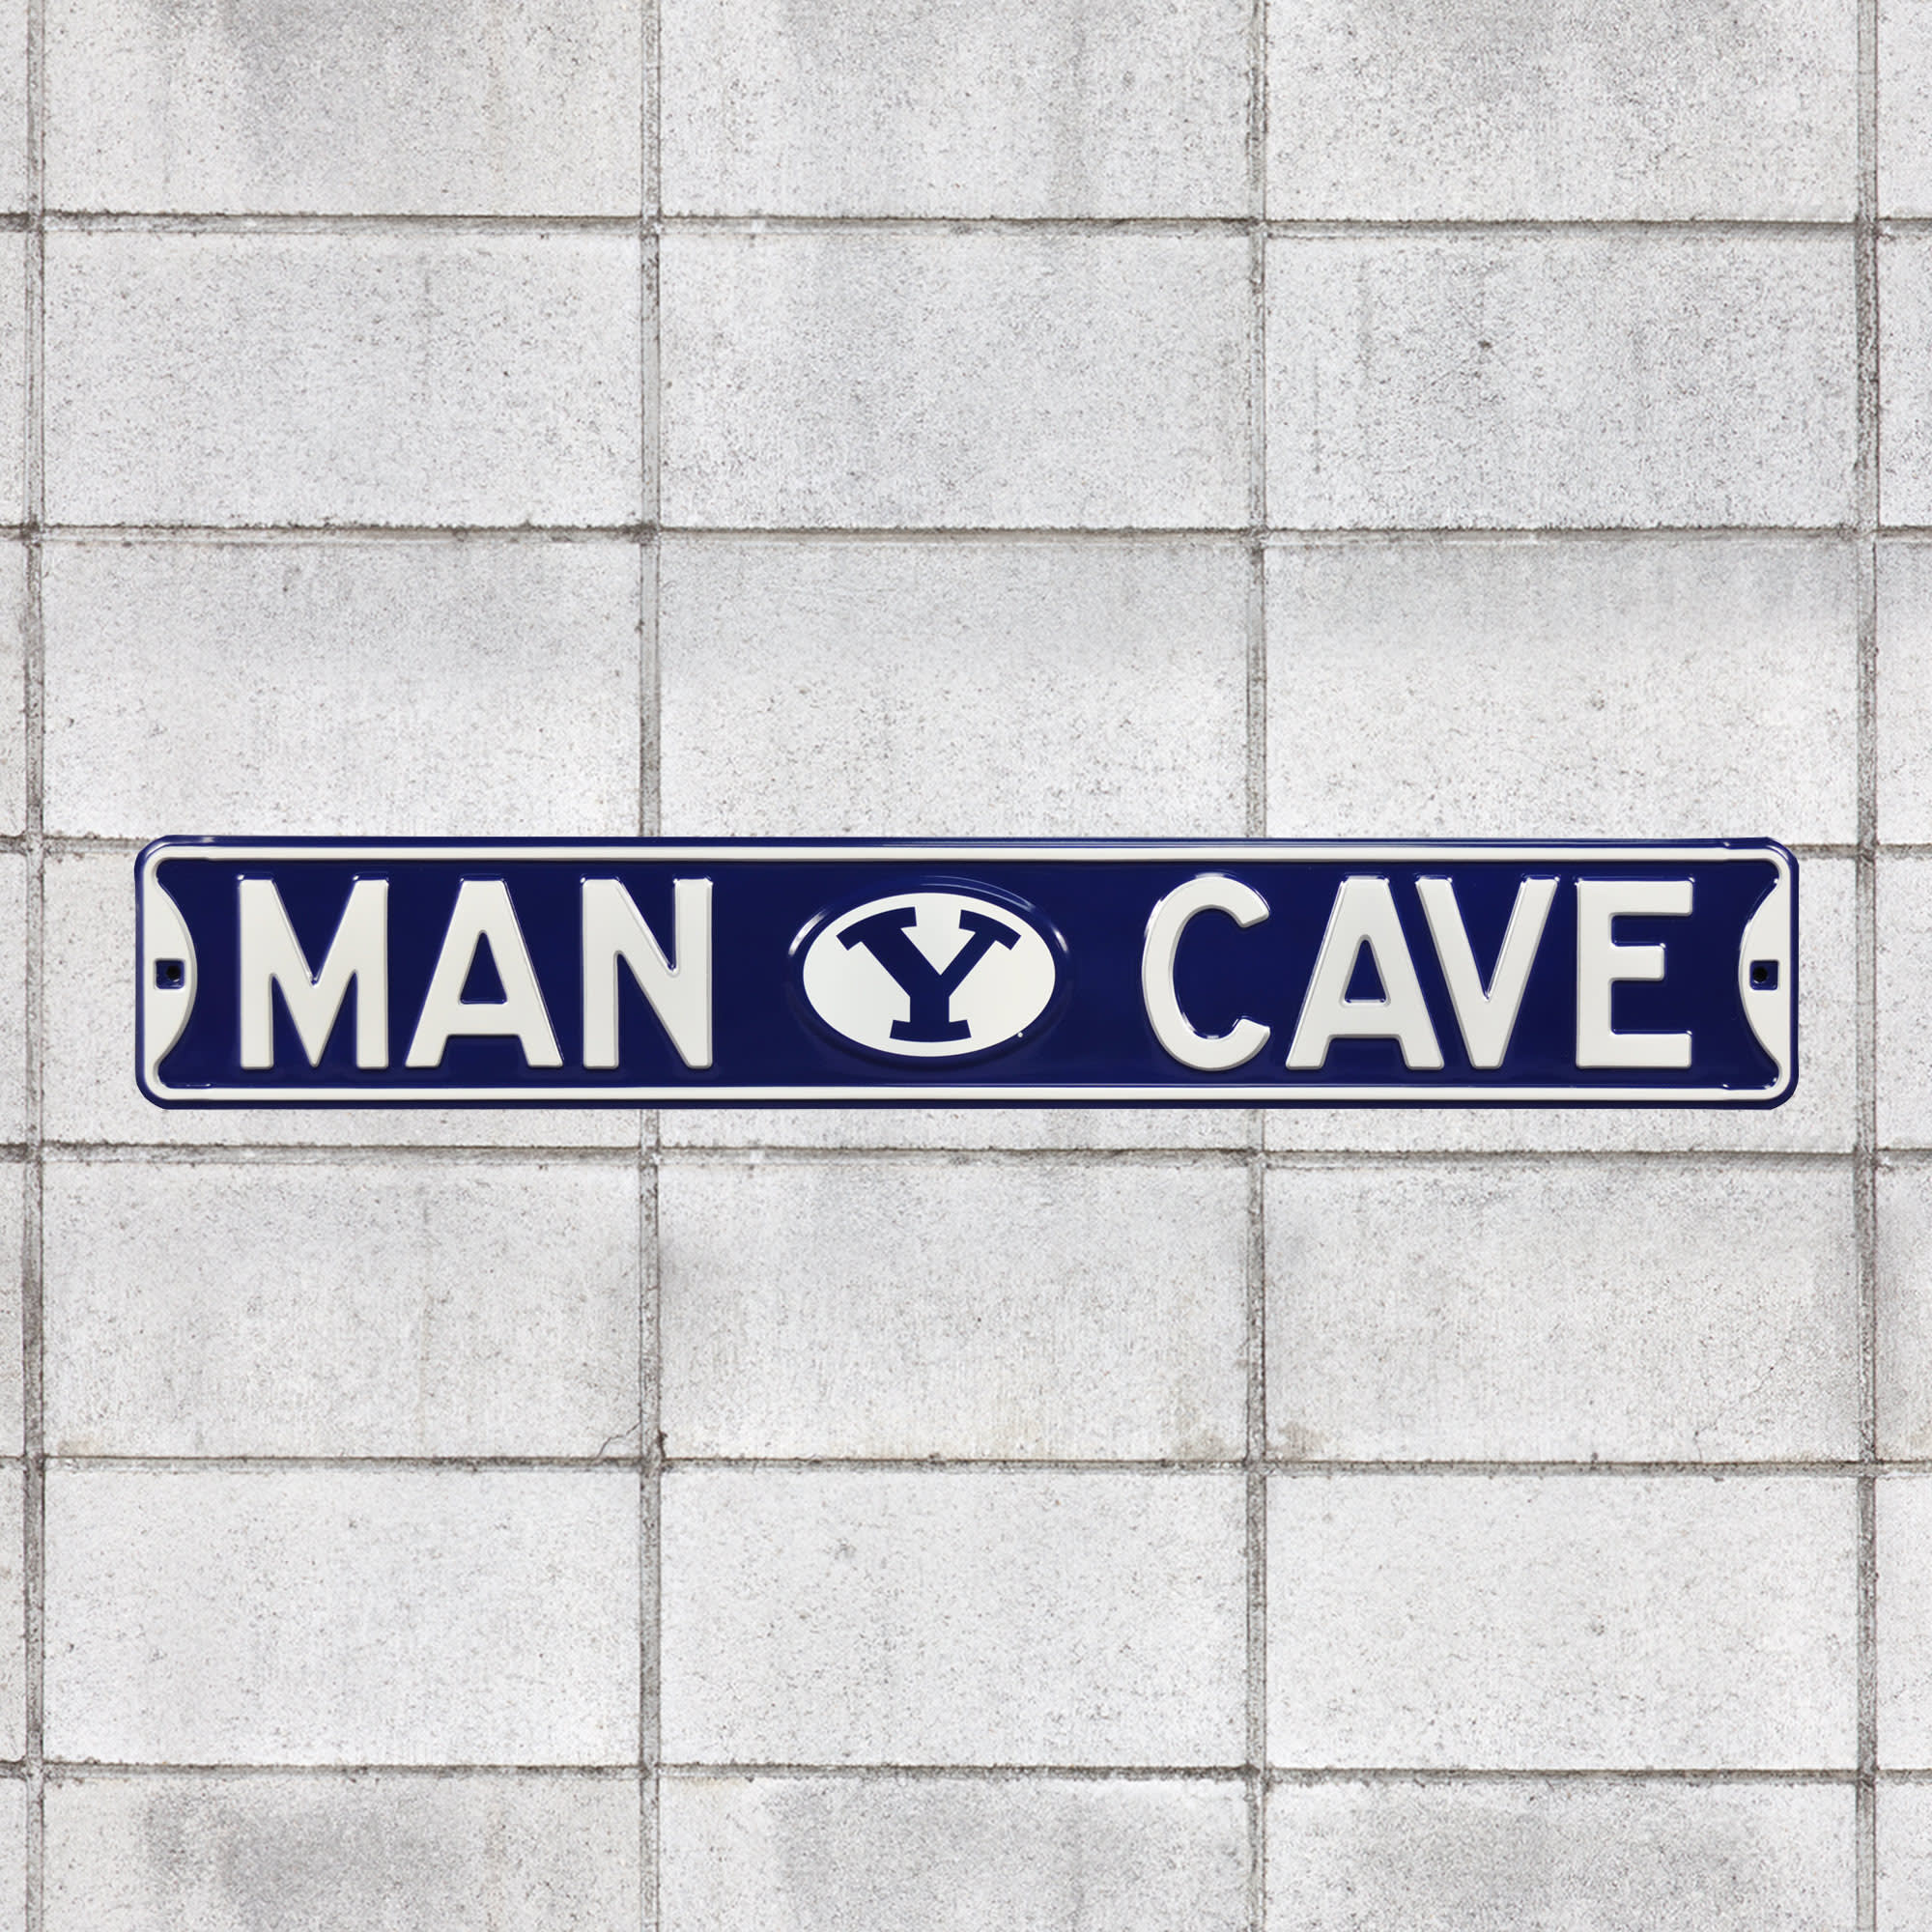 BYU Cougars: Man Cave - Officially Licensed Metal Street Sign 36.0"W x 6.0"H by Fathead | 100% Steel